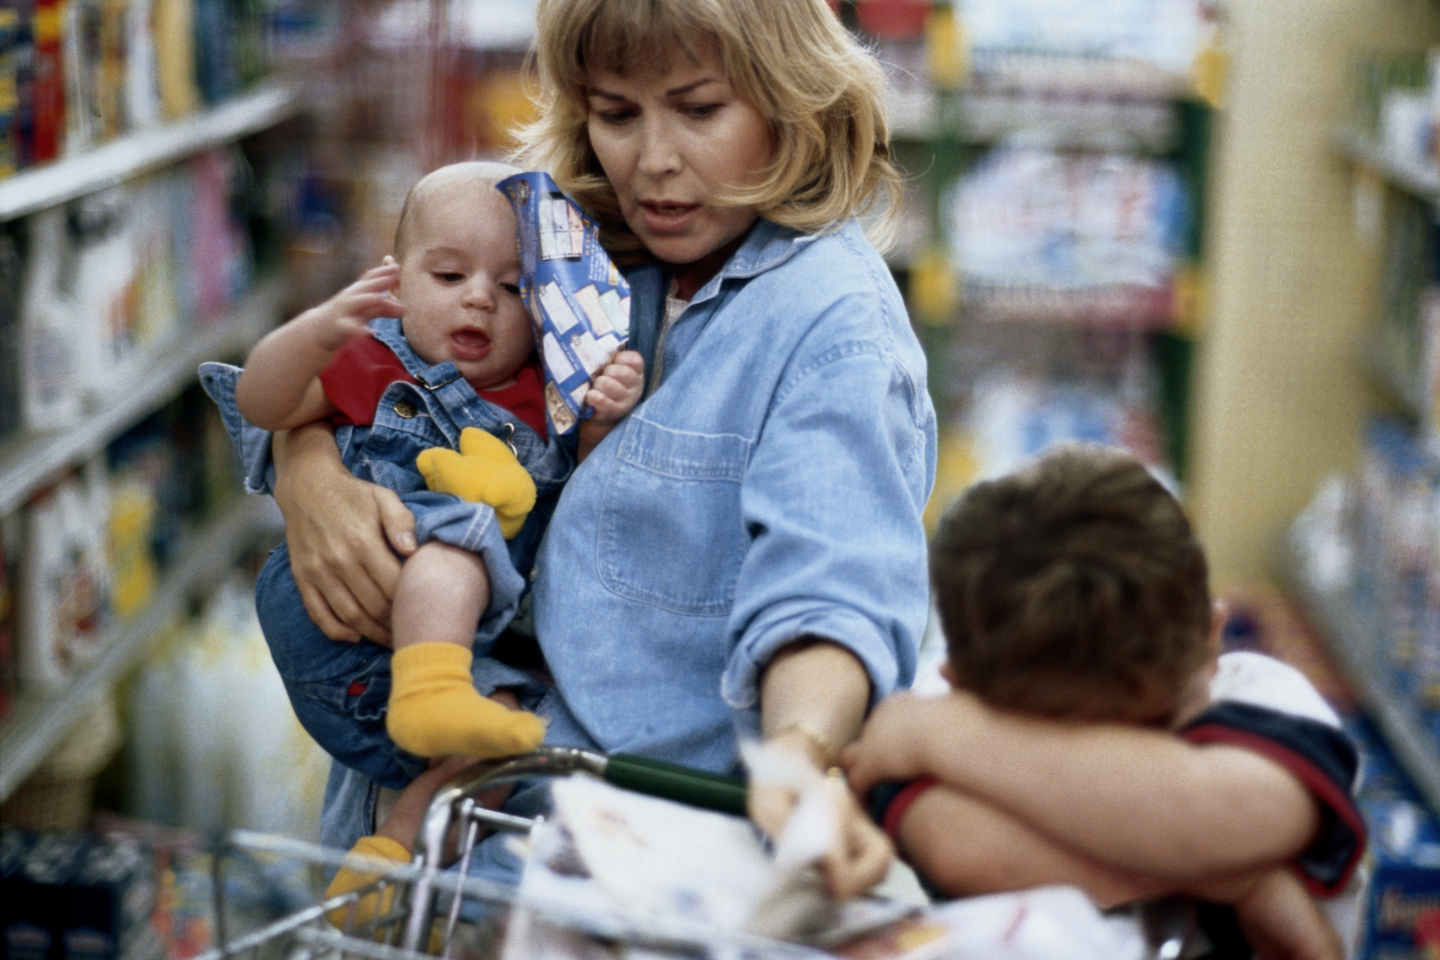 Mother and two children (1-6) shopping in supermarket